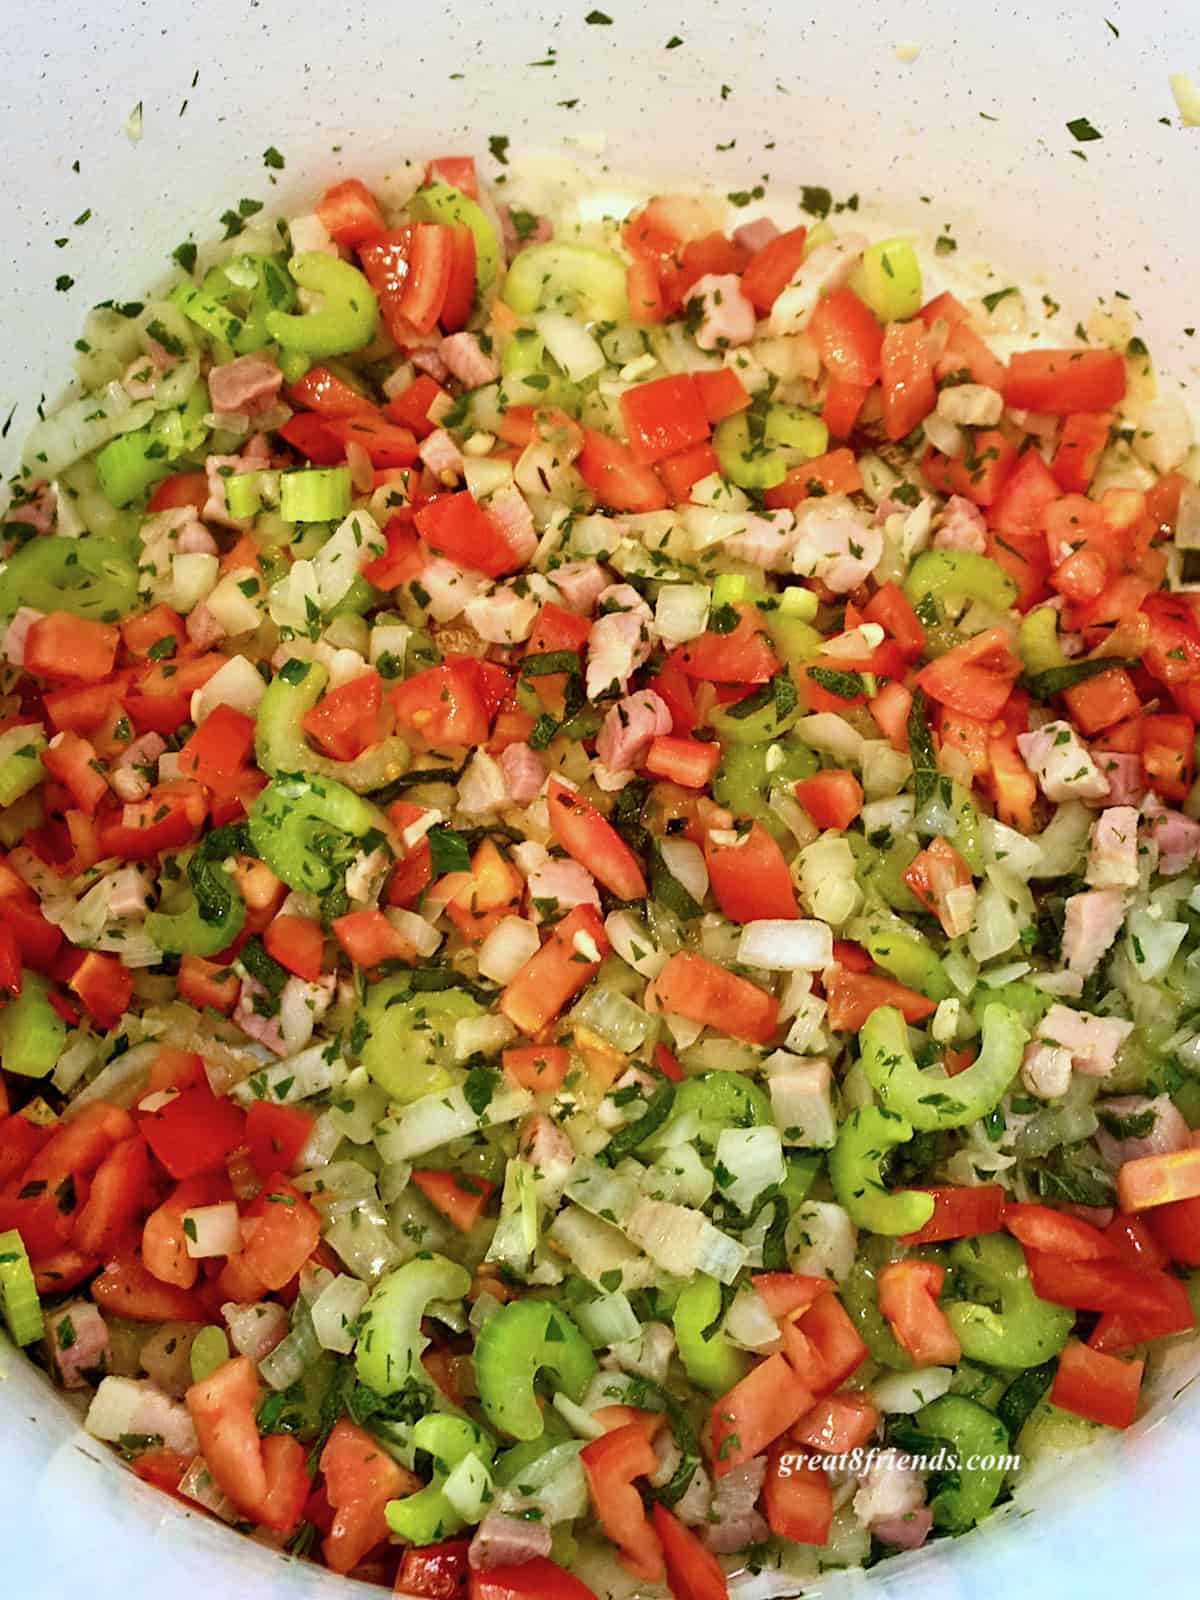 Chopped vegetables in a pan.